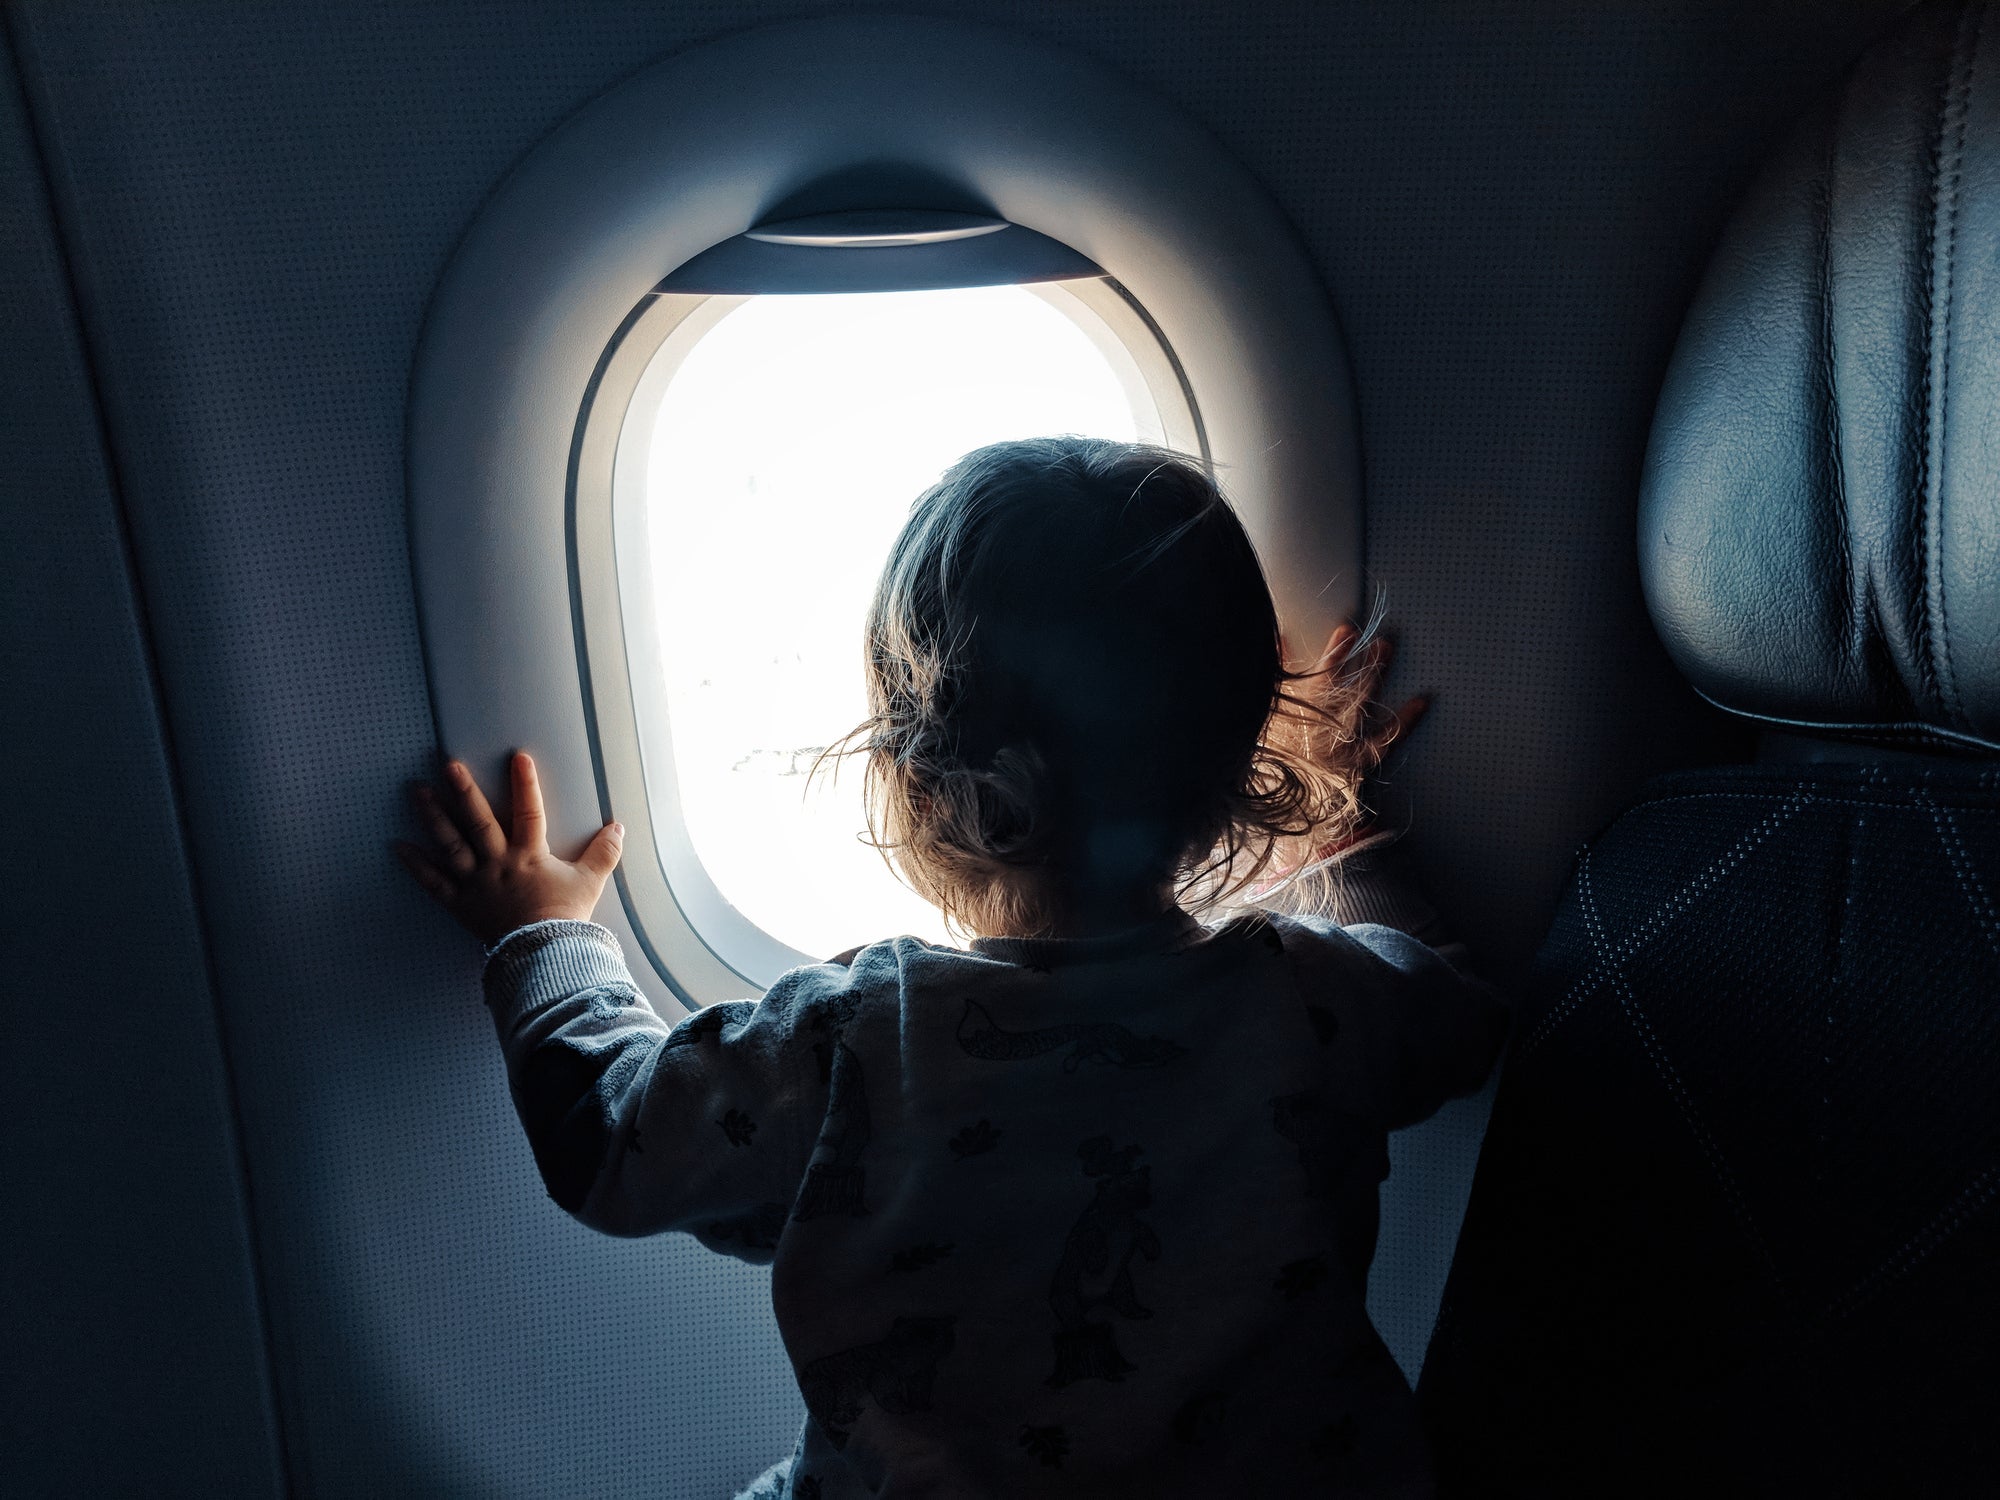 Rear View Of Baby Girl Looking Through Window In Airplane